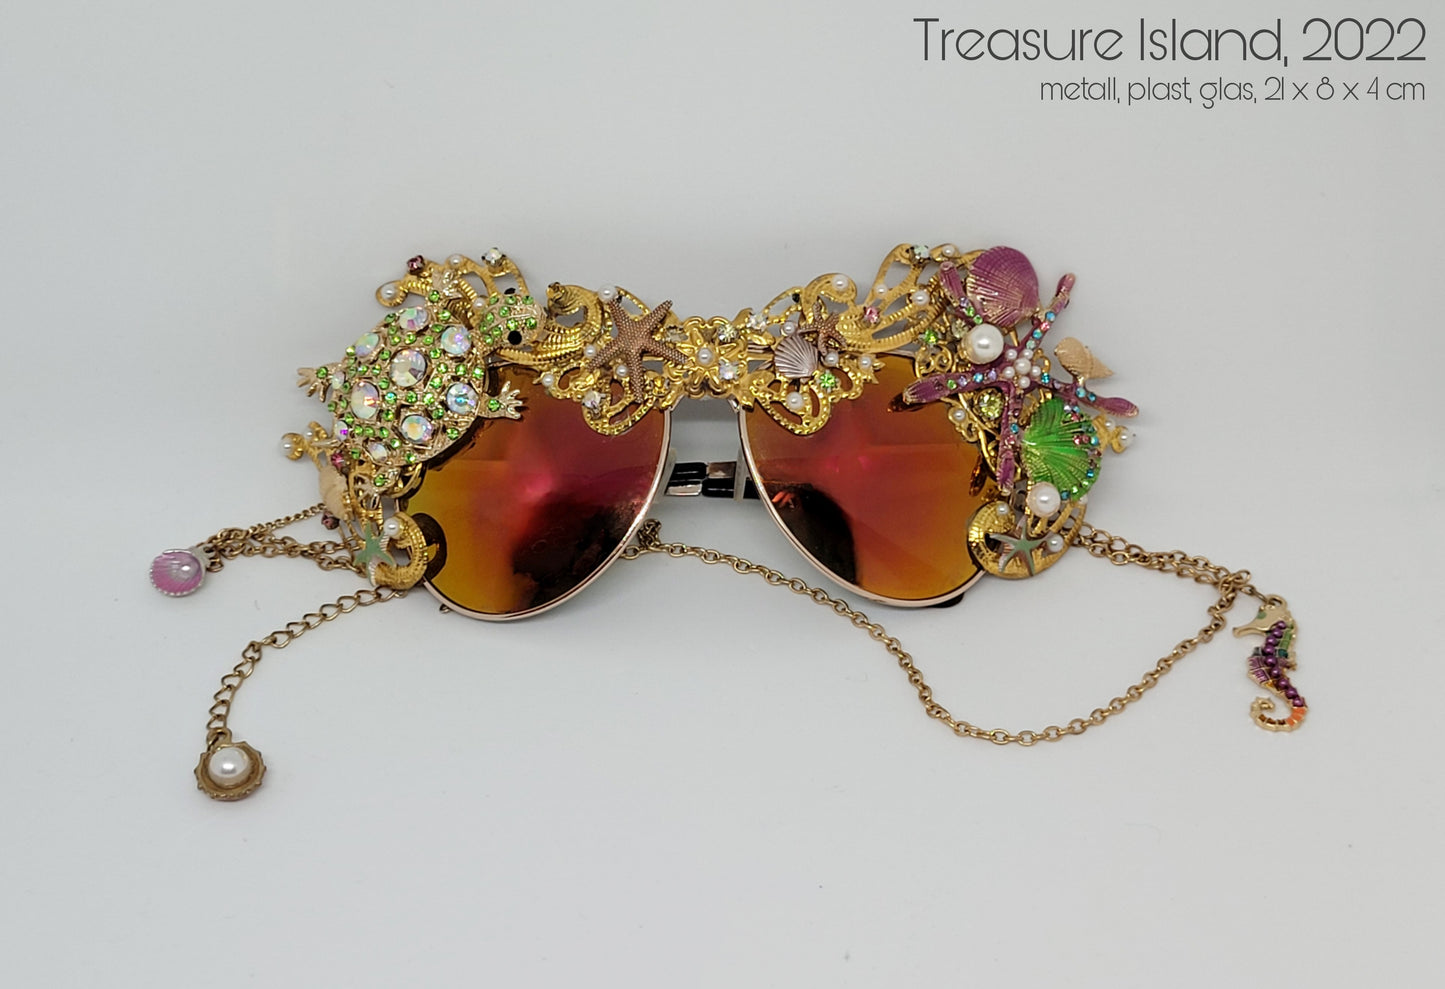 Shifting Depths collection: the Treasure Island sculptural sunglasses